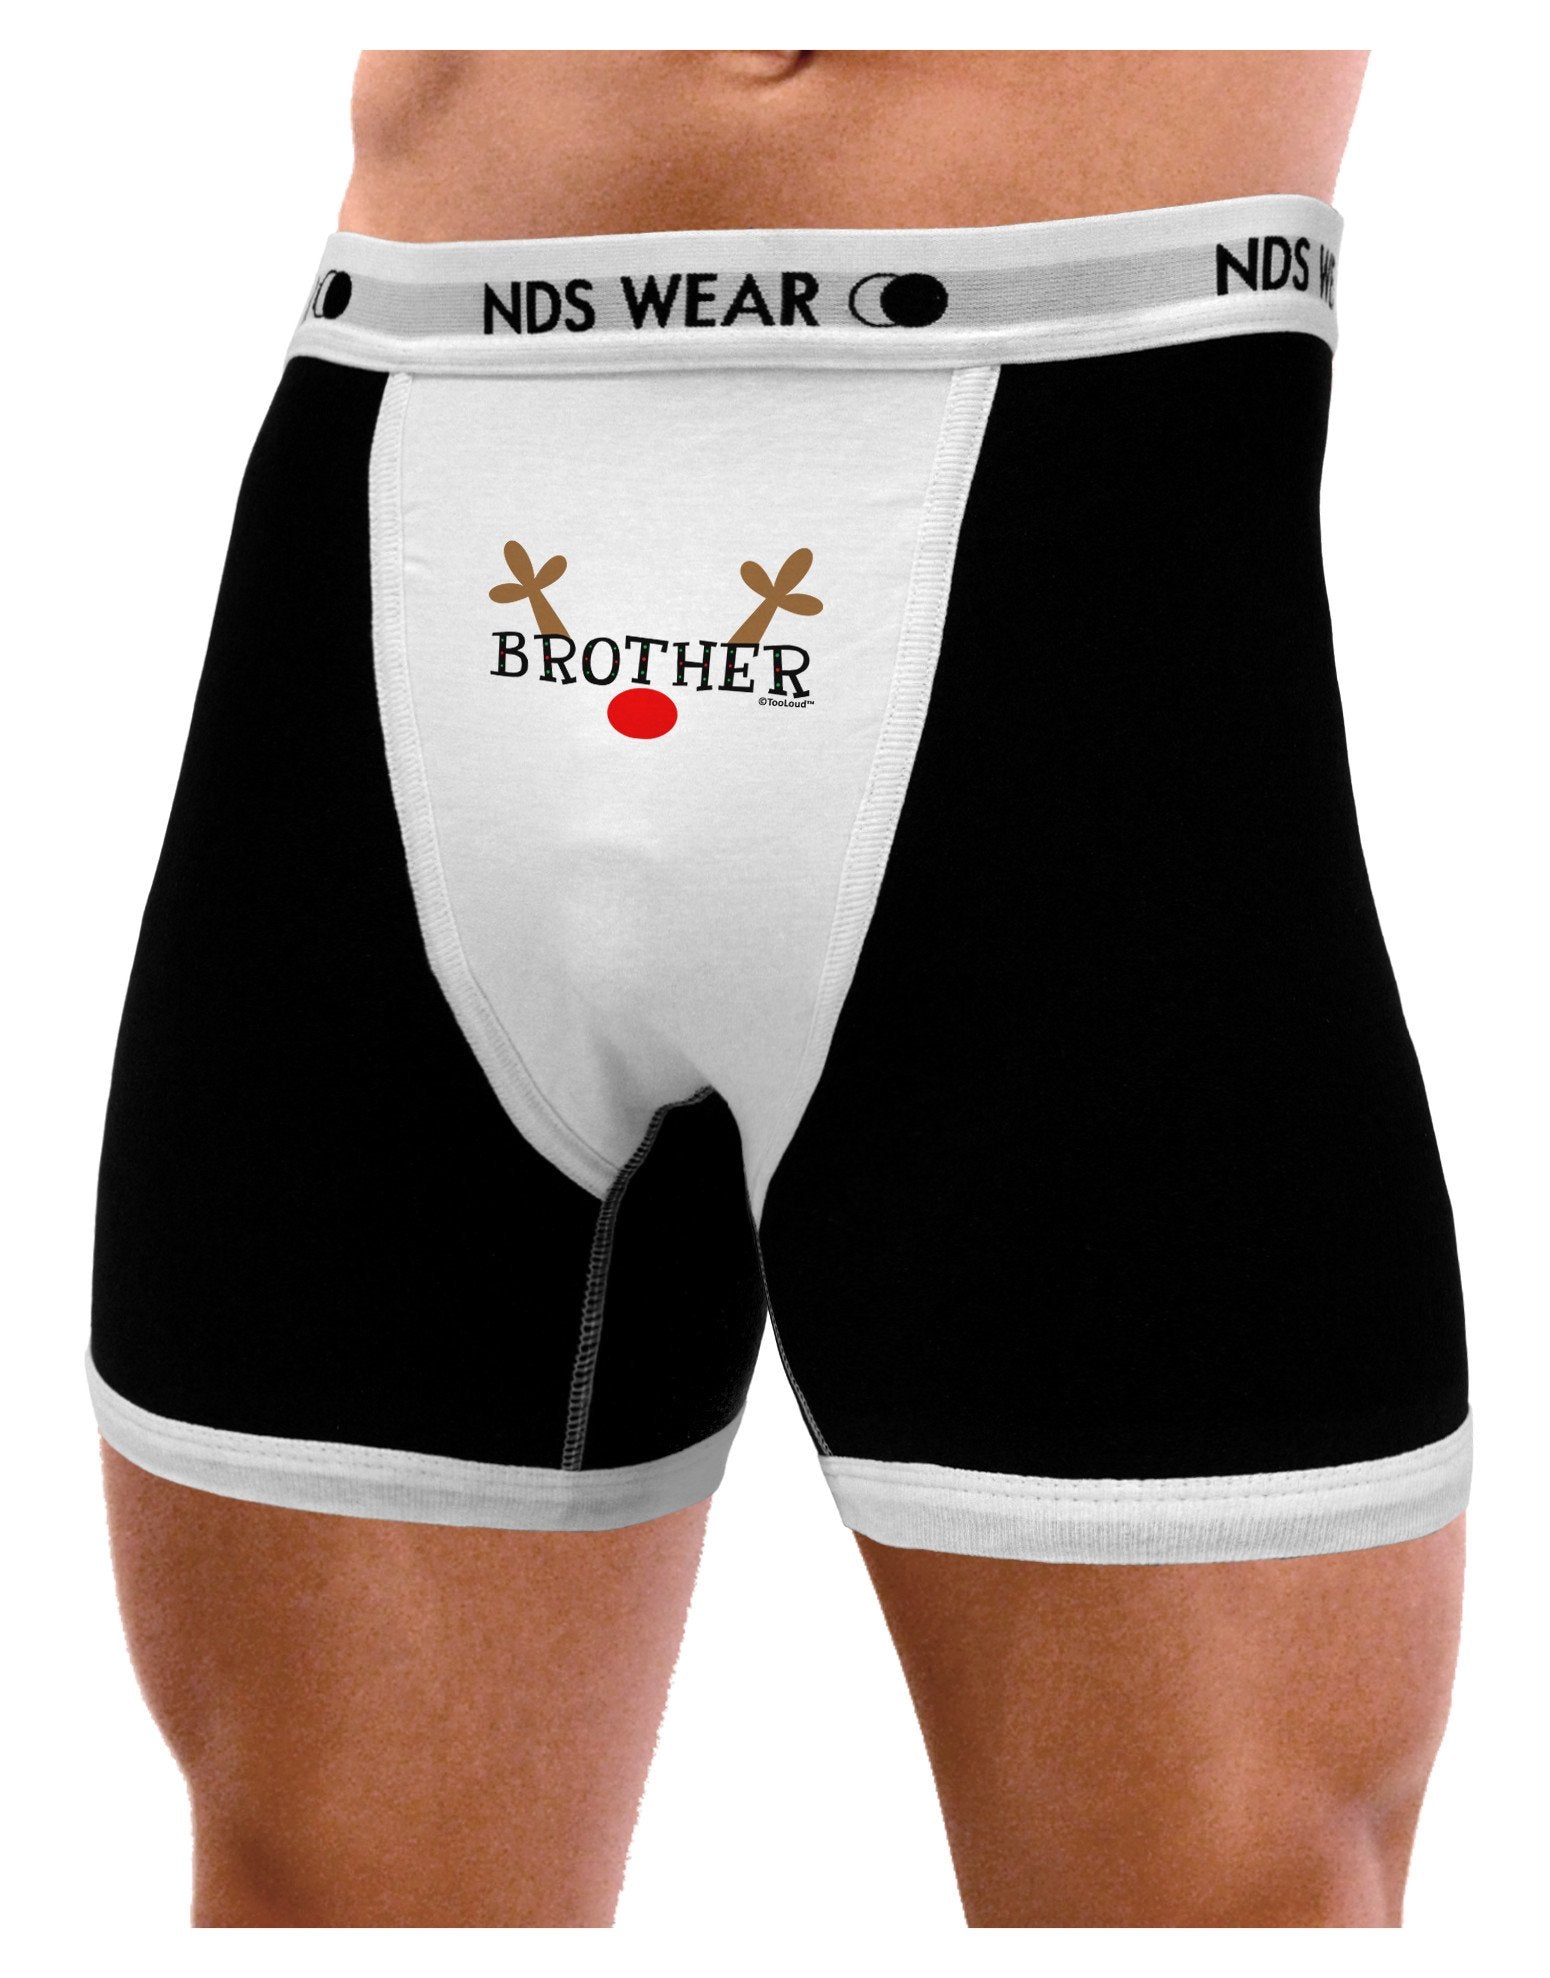 Matching Family Christmas Design - Reindeer - Brother Mens Boxer Brief -  NDS WEAR